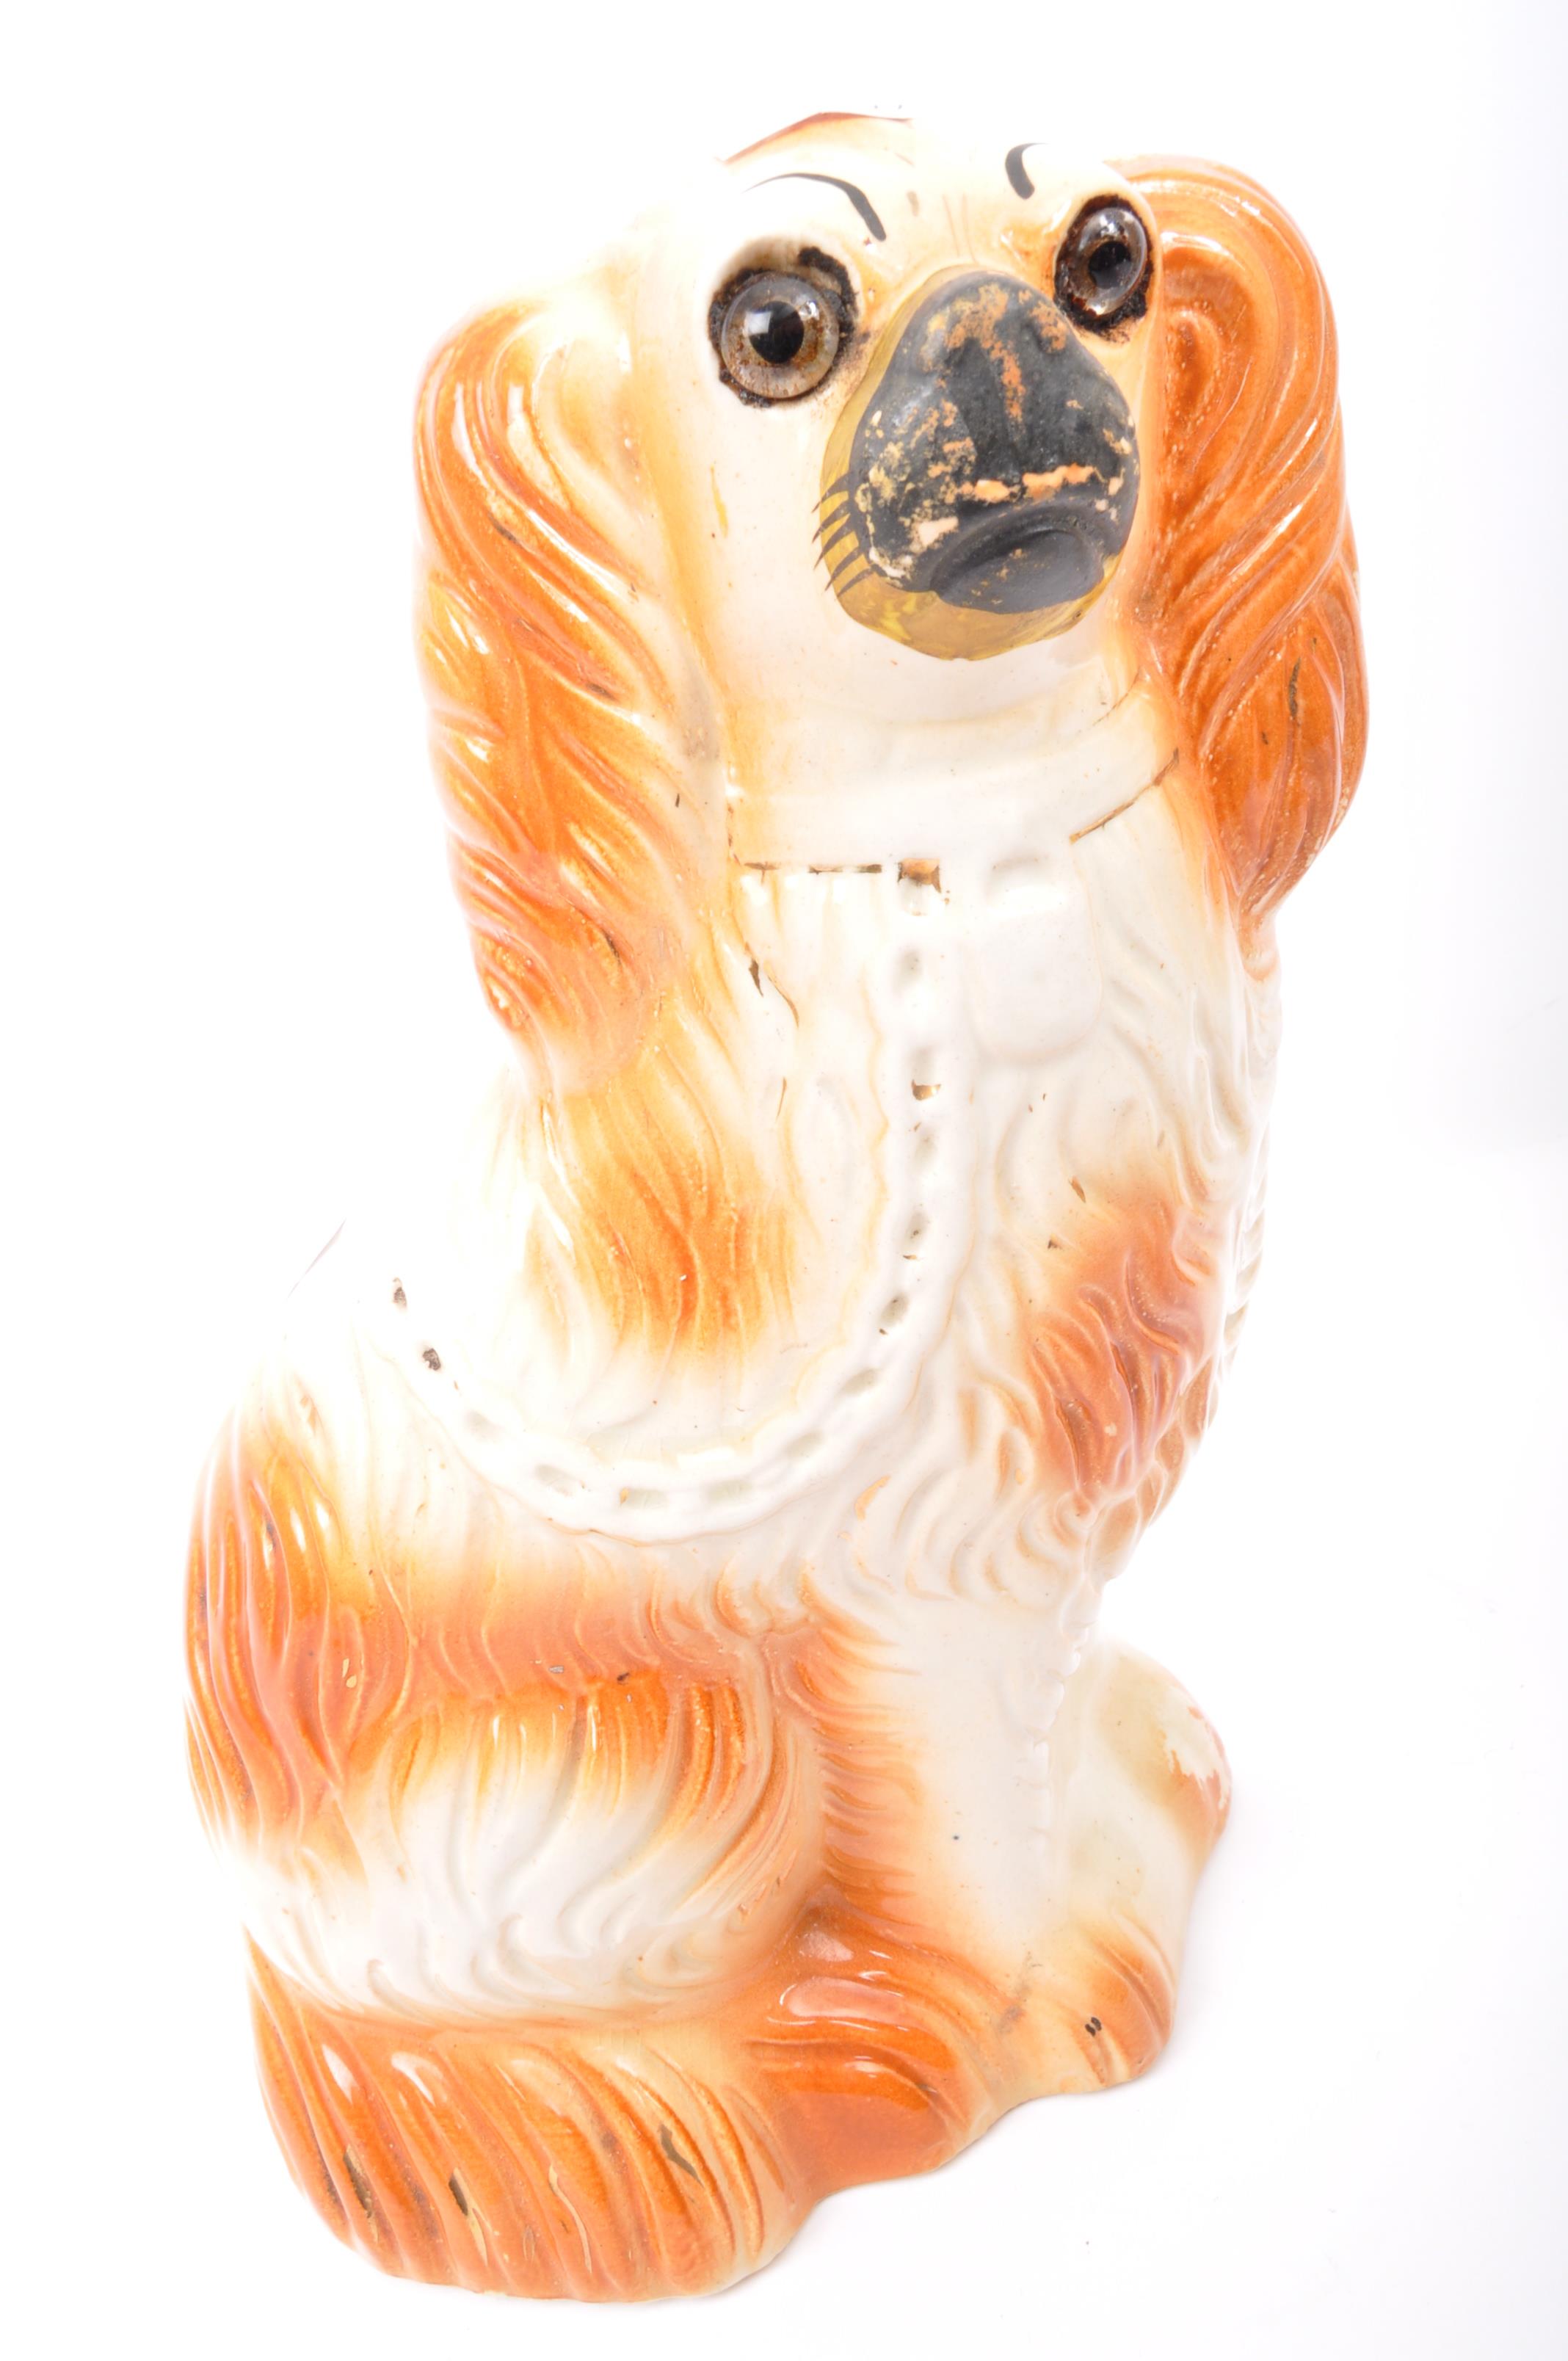 PAIR OF VICTORIAN STAFFORDSHIRE CERAMIC DOGS - Image 2 of 5